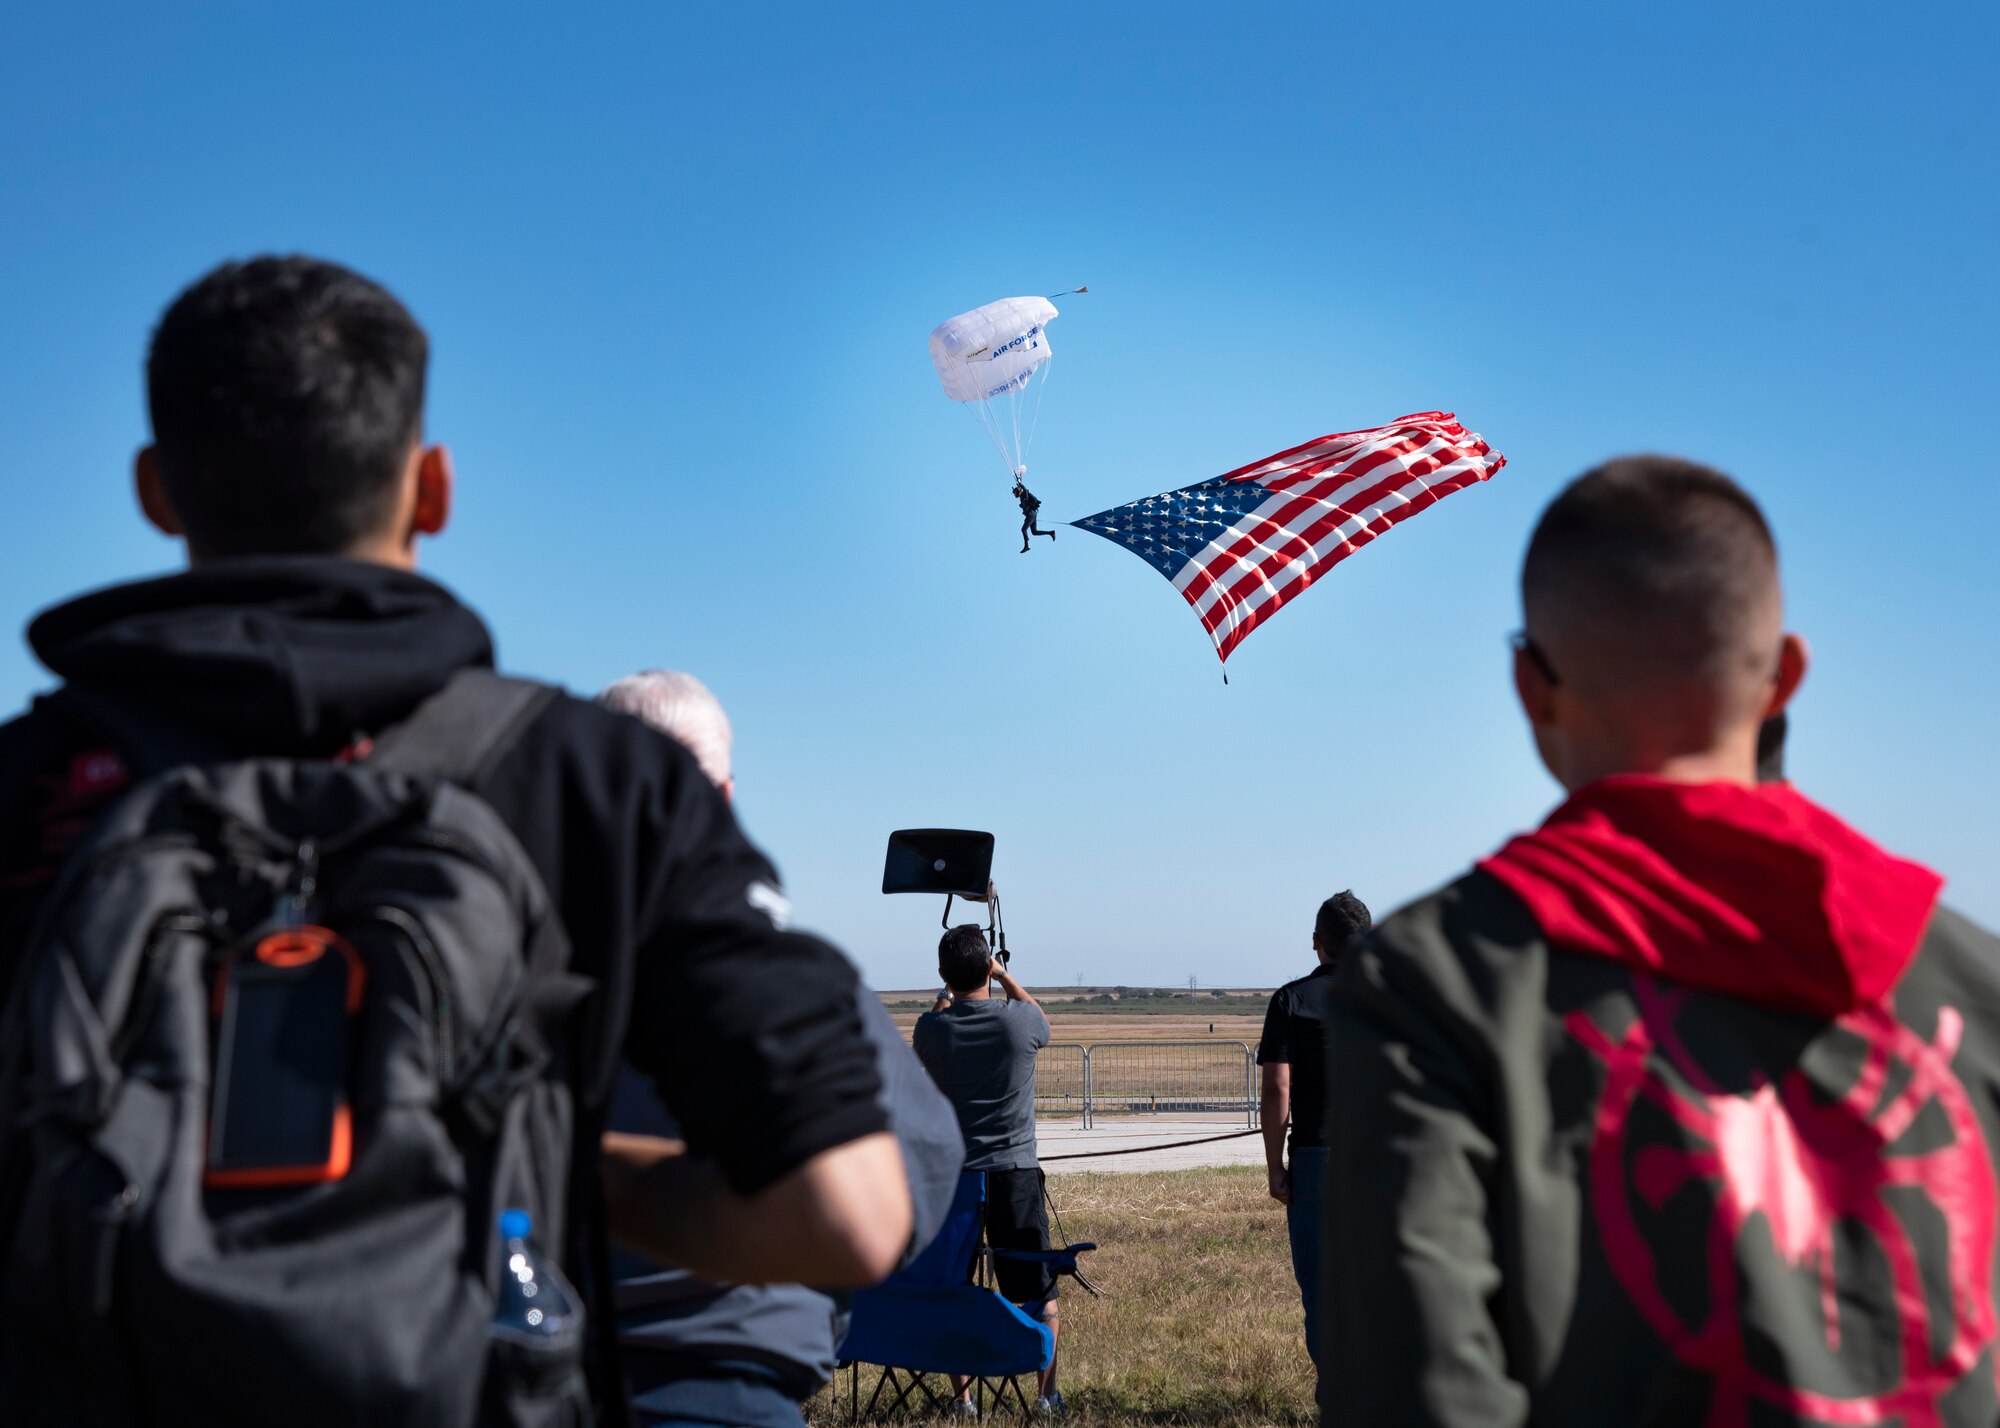 Event goers watch a U.S. Air Force Academy Wings of Blue parachute team member at the Sheppard Air Force Base Guardians of Freedom Open House and Air Show at Sheppard AFB, Texas, Oct. 27, 2019. The open house and air show is a chance for Sheppard to show and communicate the Air Force's mission as well as Sheppard's specific mission of training, developing and inspiring the next generation of Air Force warriors. (U.S. Air Force photo by Airman 1st Class Pedro Tenorio)